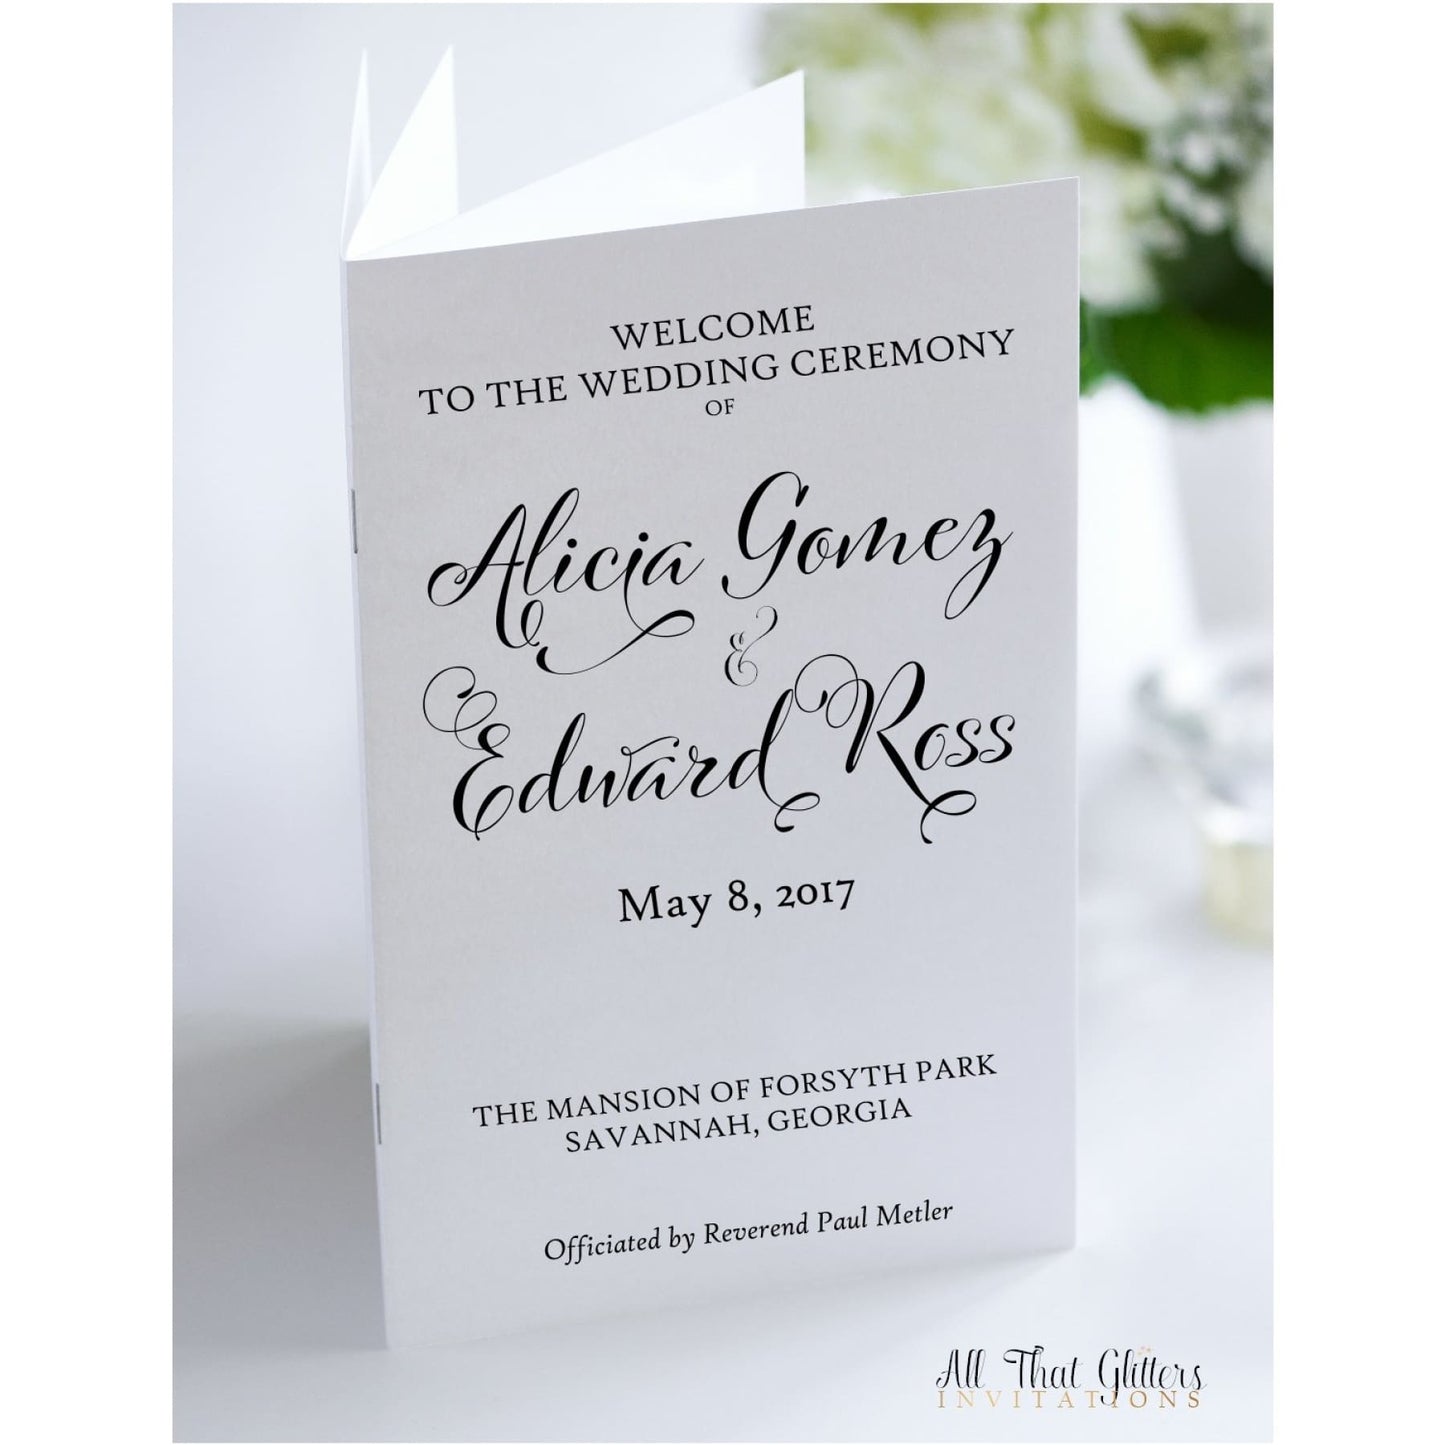 Ceremony Program, 8 Page Book - All That Glitters Invitations